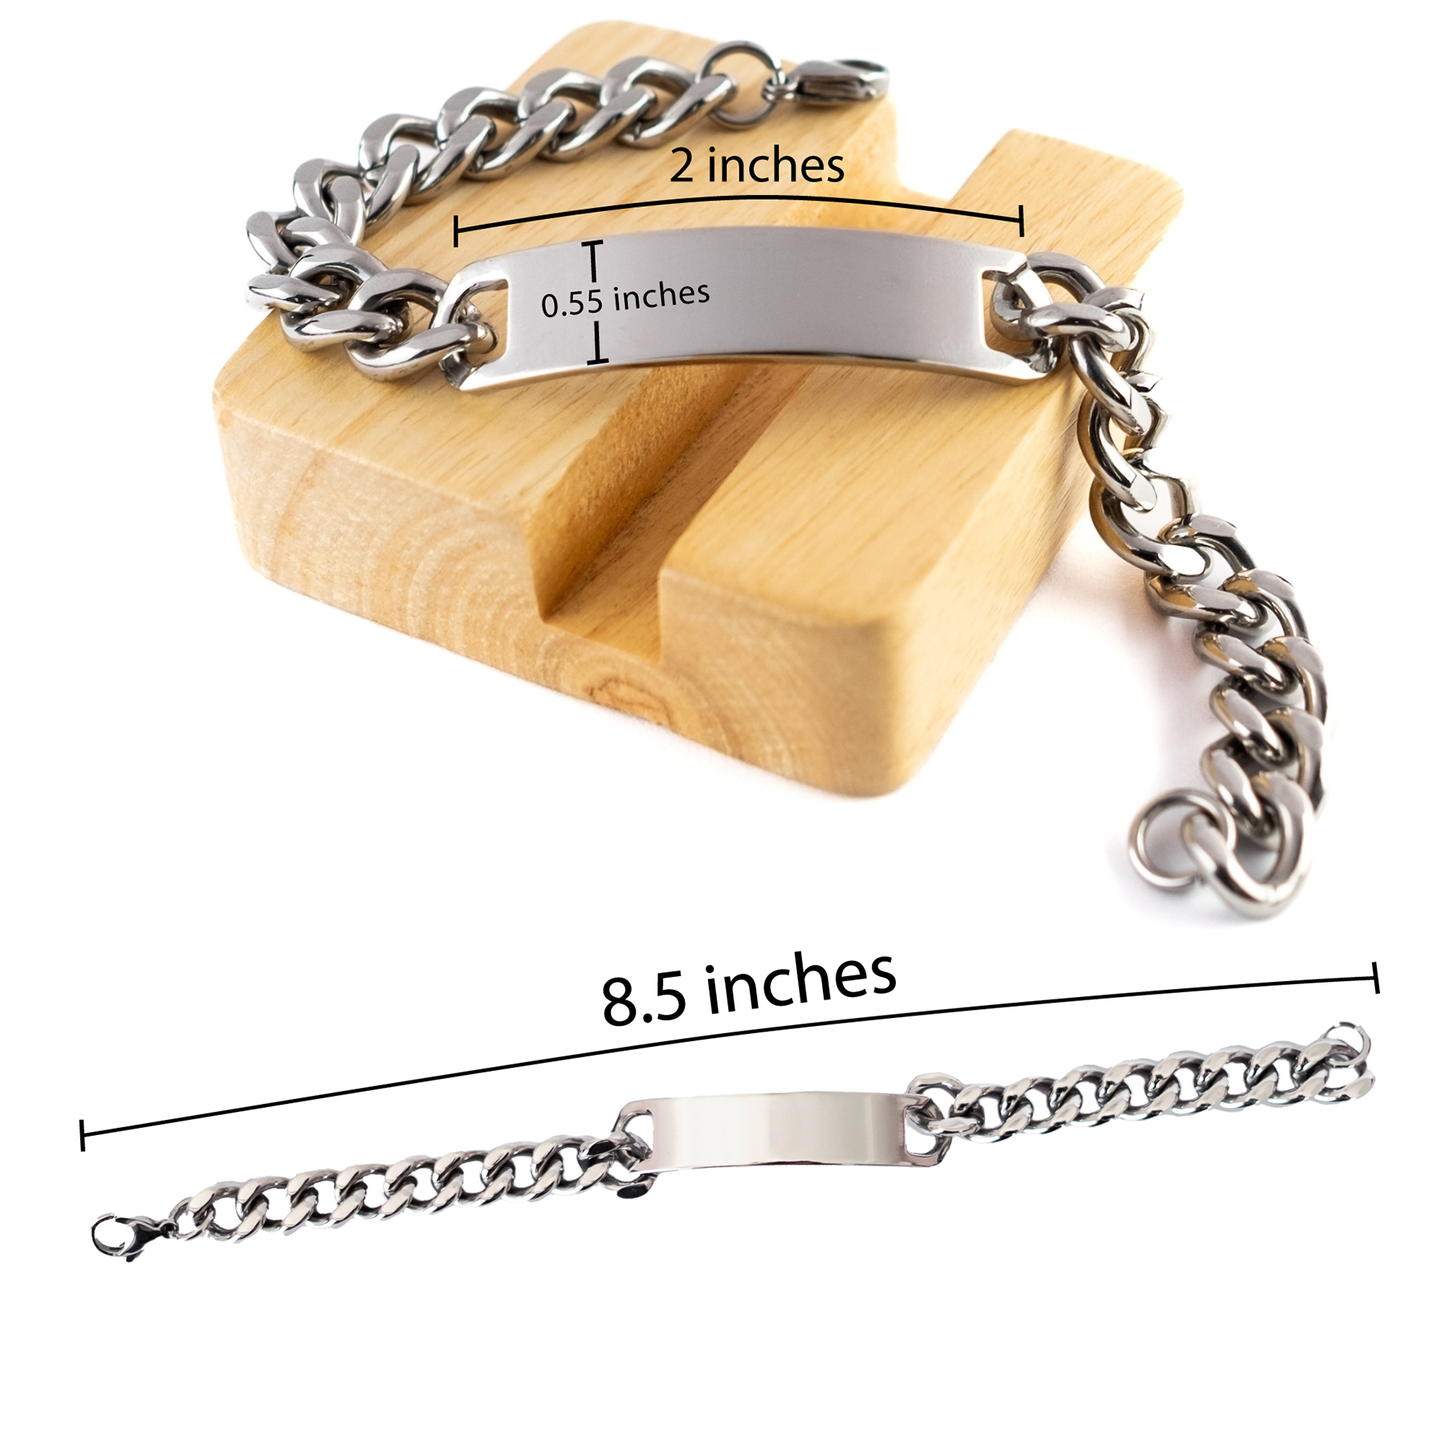 Special Fiance Cuban Chain Stainless Steel Bracelet for a Meaningful Gift with Engraved Love and Confidence for Christmas, Anniversary, or Birthday